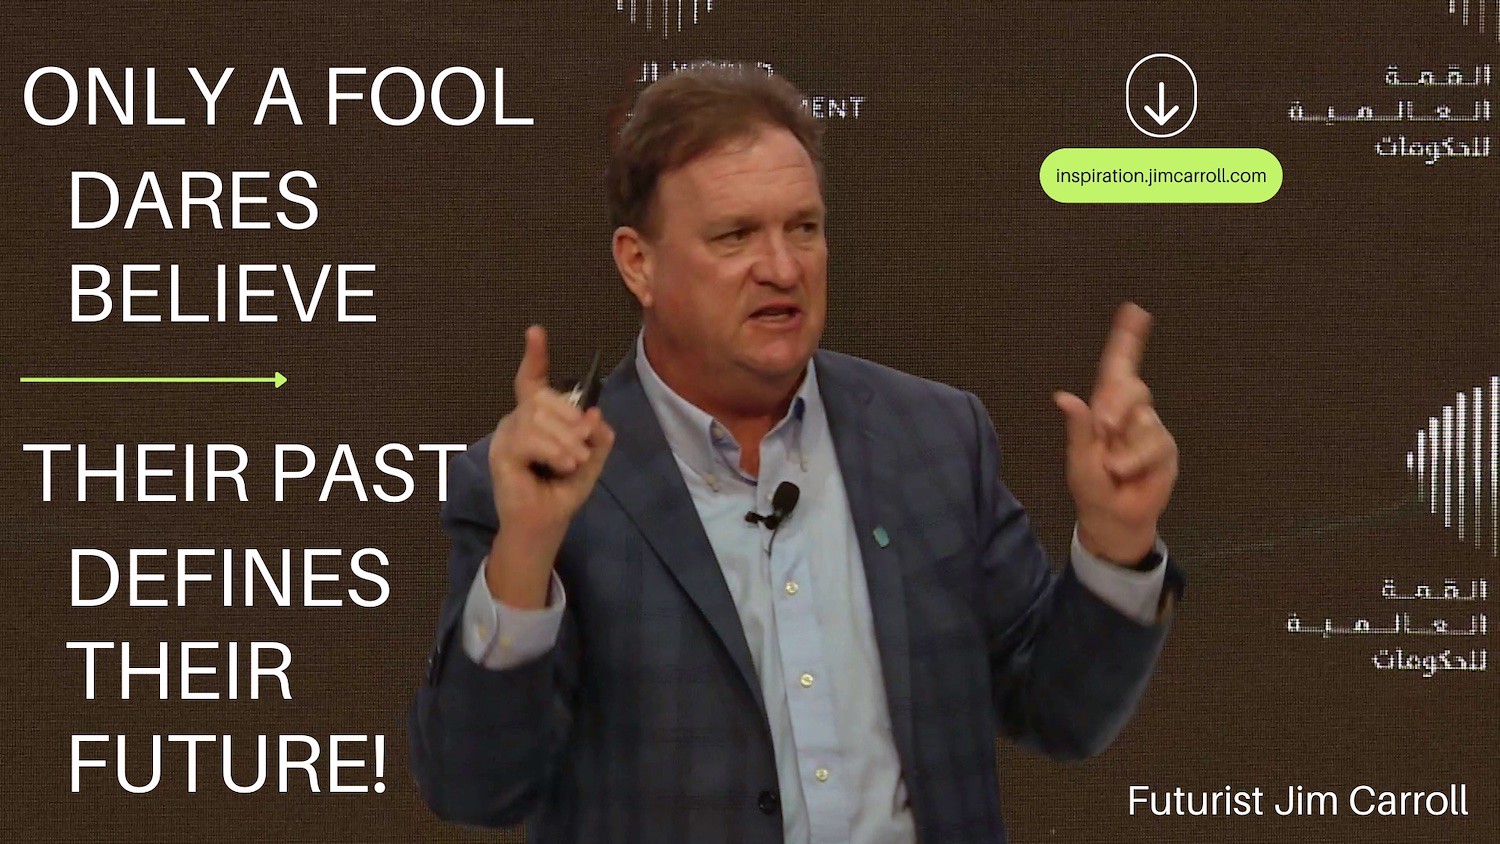 Blac"Only a fool dares believe their past defines their future!" - Futurist Jim Carrollk and Green Corporate Business Coaching Promotional Video